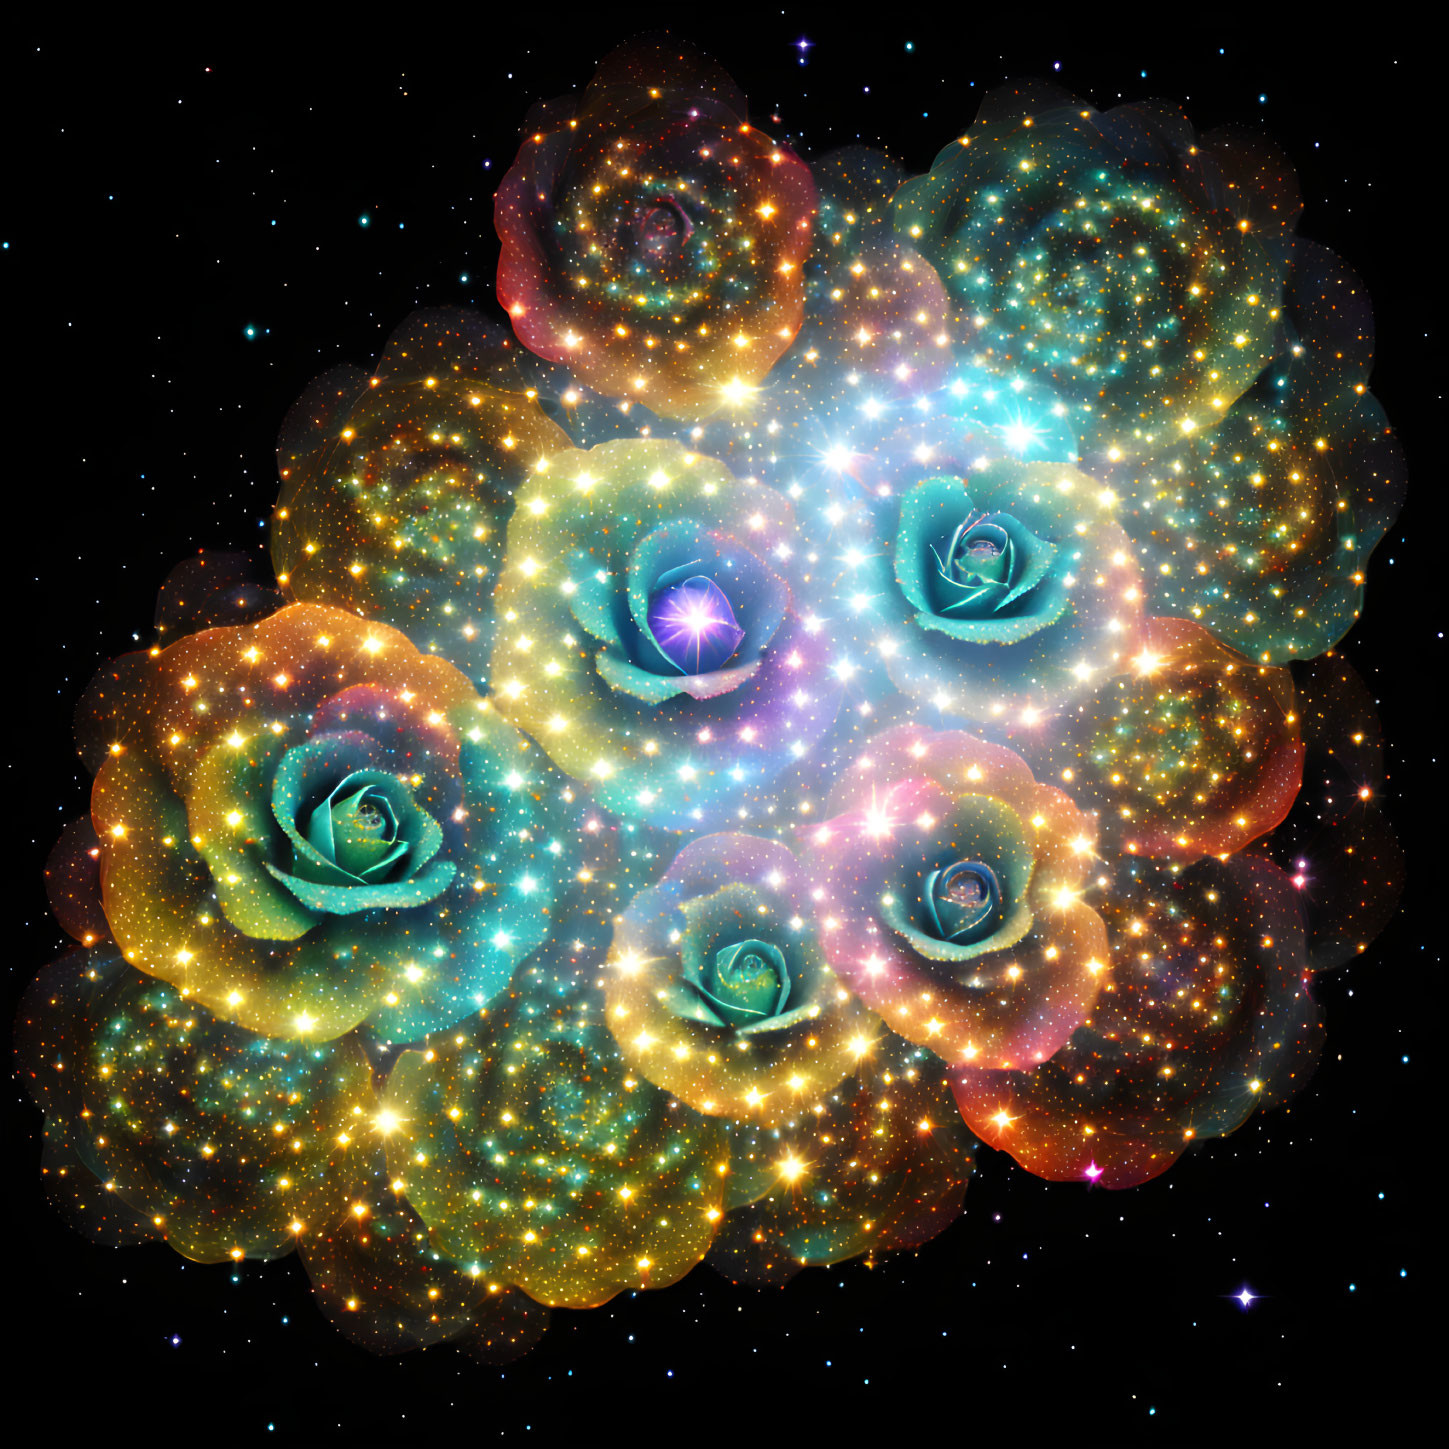 Vibrant Cosmic Flowers on Galaxy-themed Background